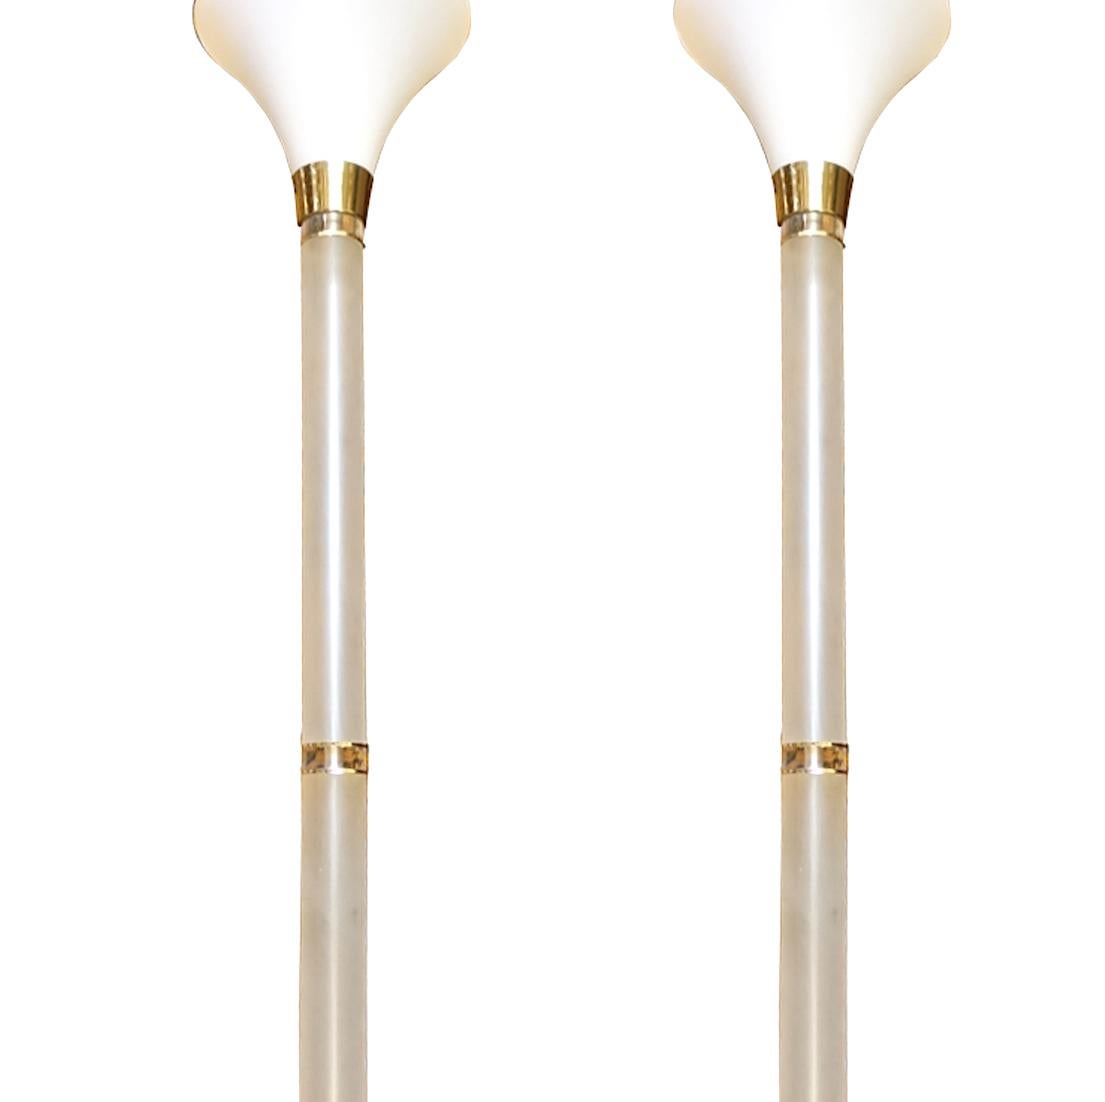 A pair of circa 1950s French Lucite torchiere floor lamps with glass shades.

Measurements:
Height 60